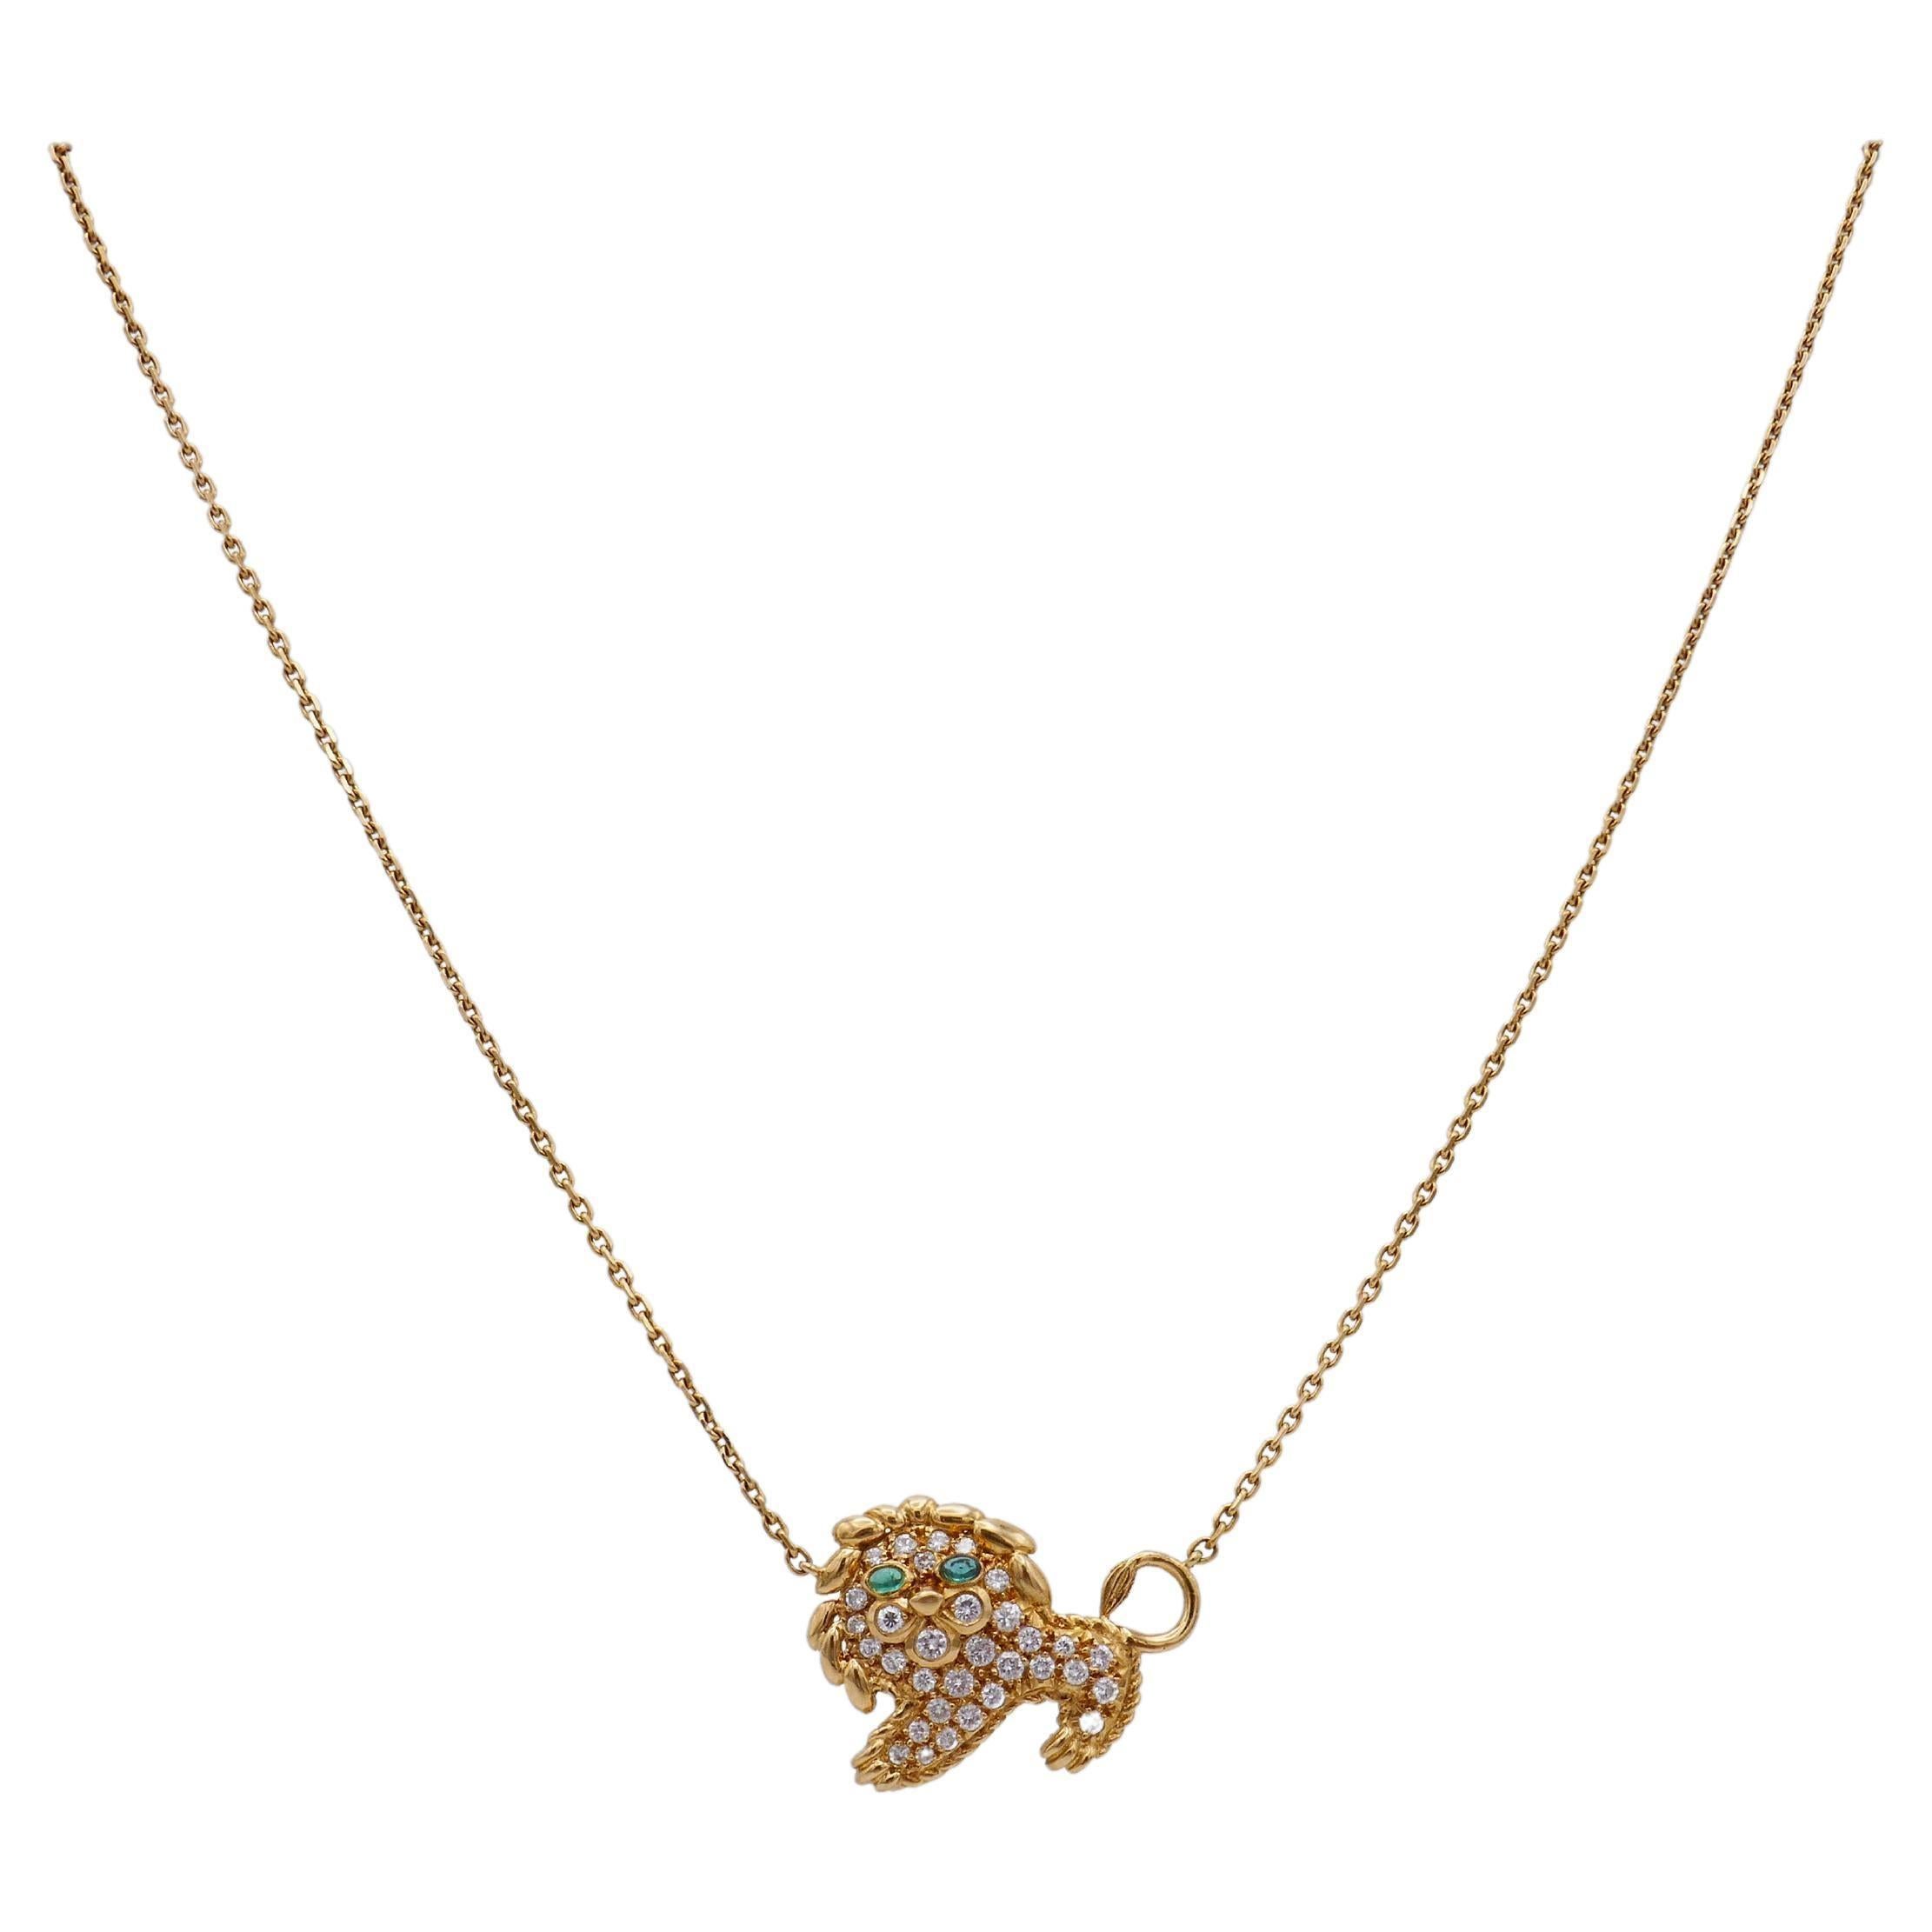 A delicate and cute gold Leo necklace by Fred Paris. 
Made of 18k yellow gold, the necklace features a lion pendant attached to a cable link chain. 
The pendant set with ~1.50 carats of pave and bezel set round brilliant diamonds, F-G color, VS